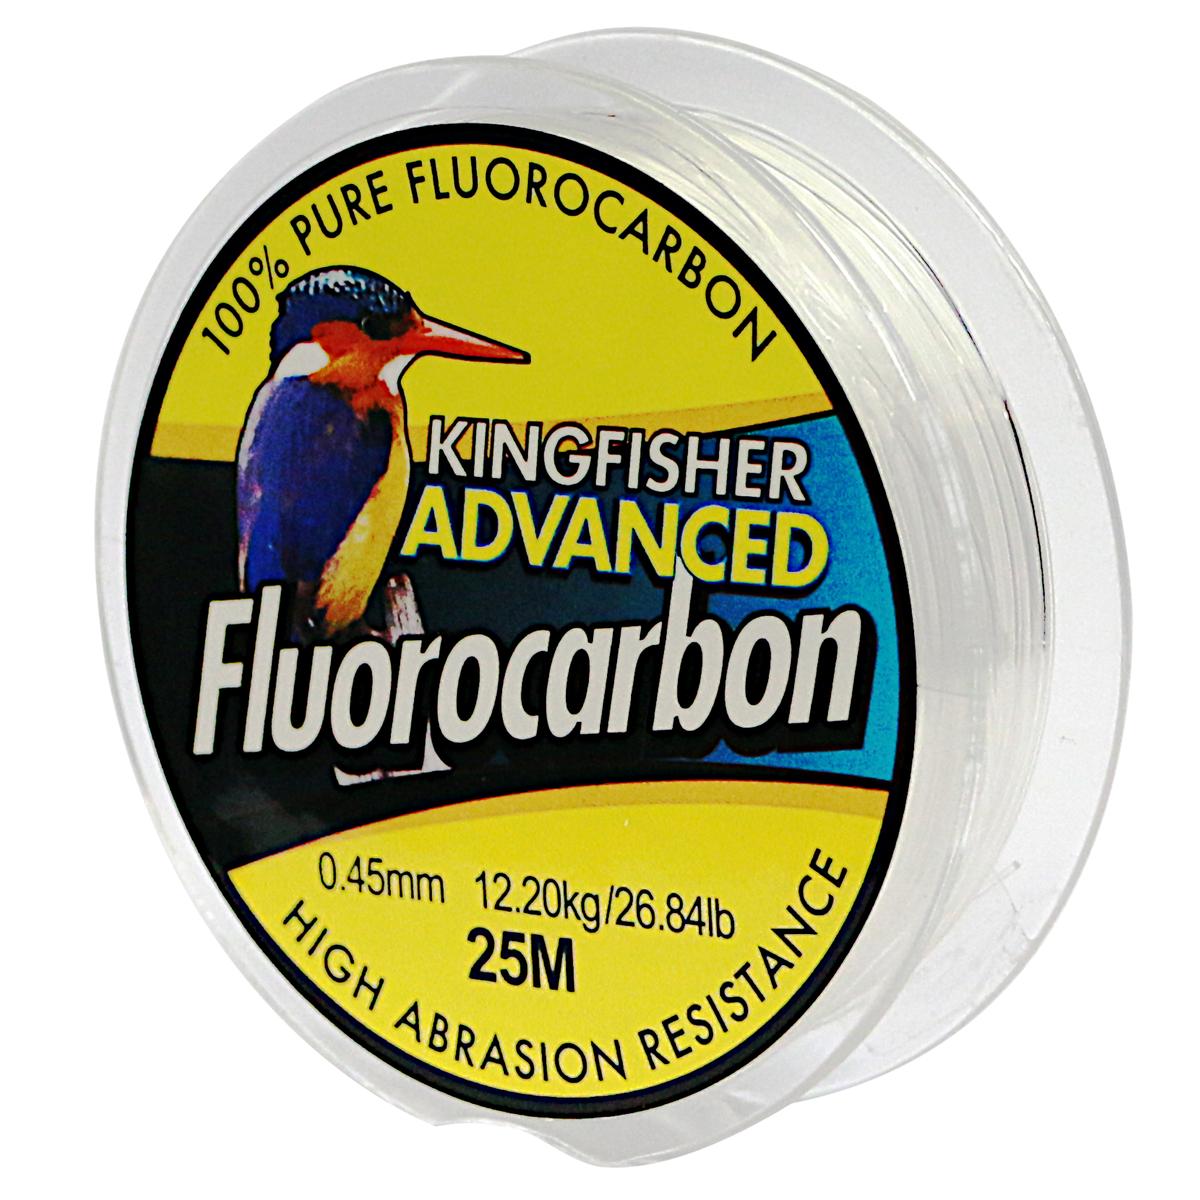 Kingfisher Advanced Fluorocarbon Leader Line 25m (26.84Lb/12.2Kg) (Clear), Shop  Today. Get it Tomorrow!